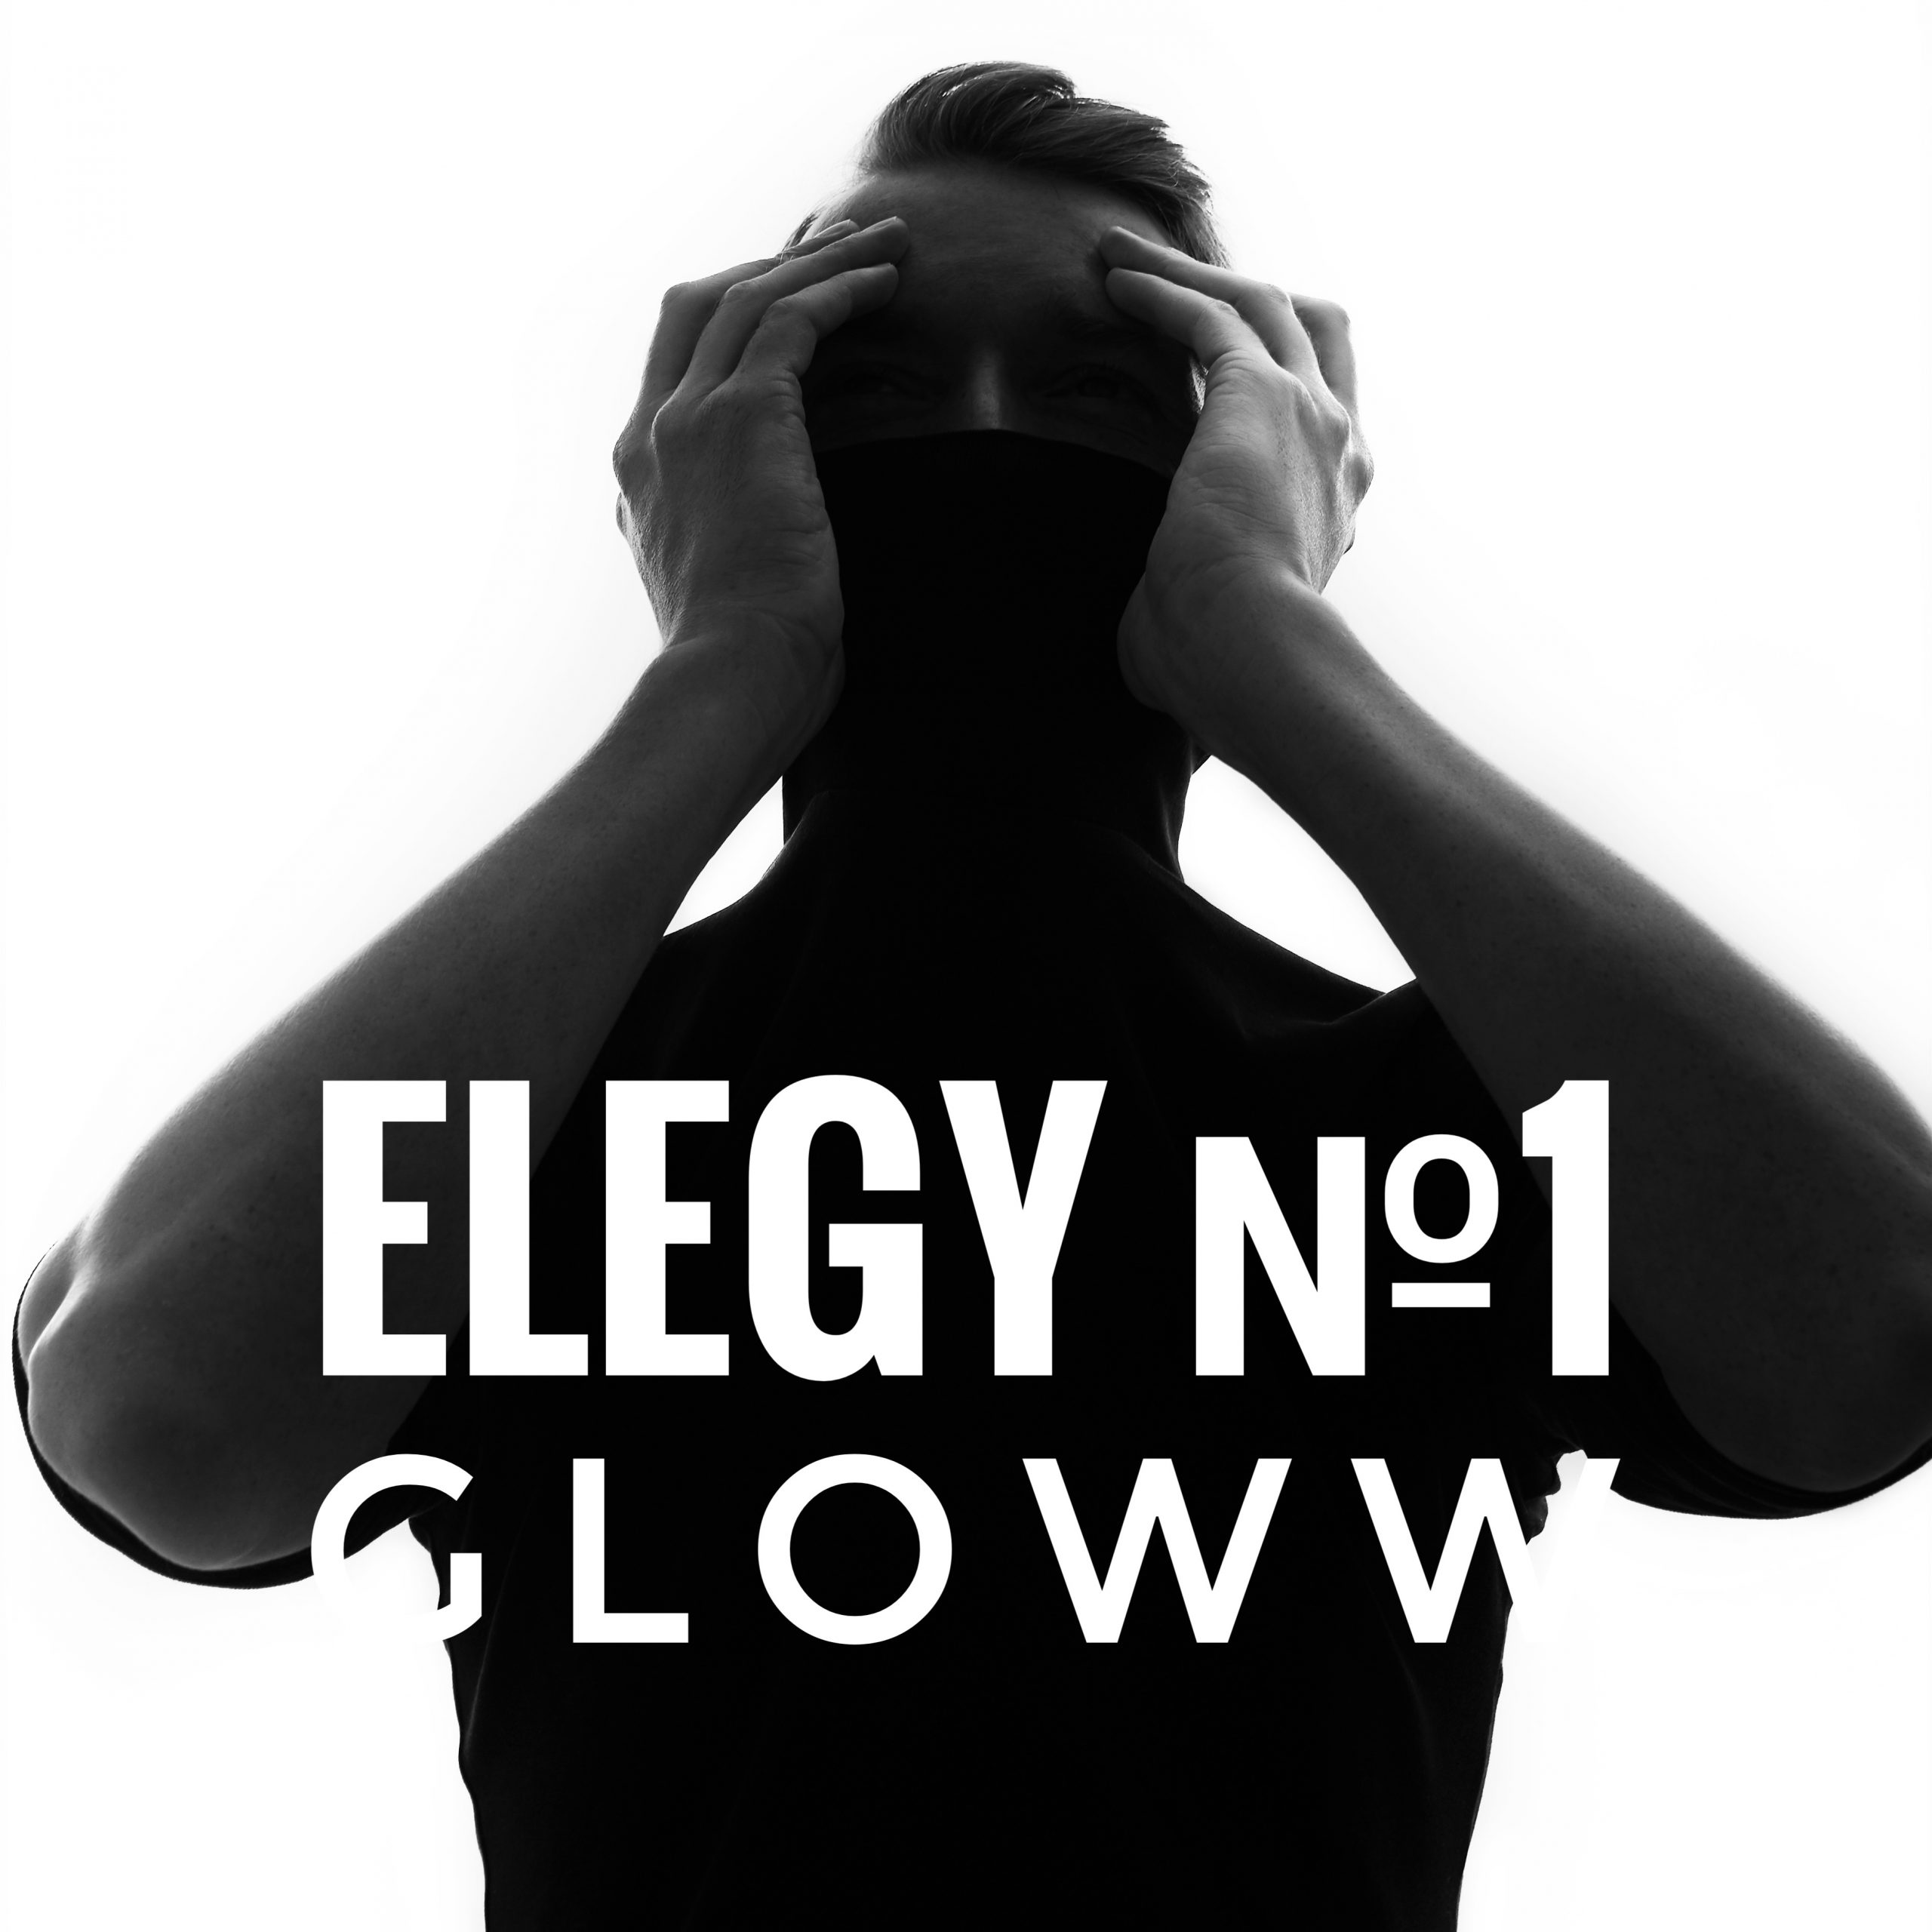 The new single ‘Elegy №1’ from ‘Gloww’ touches, heals and affects the listener sticking in your head, heart and soul.